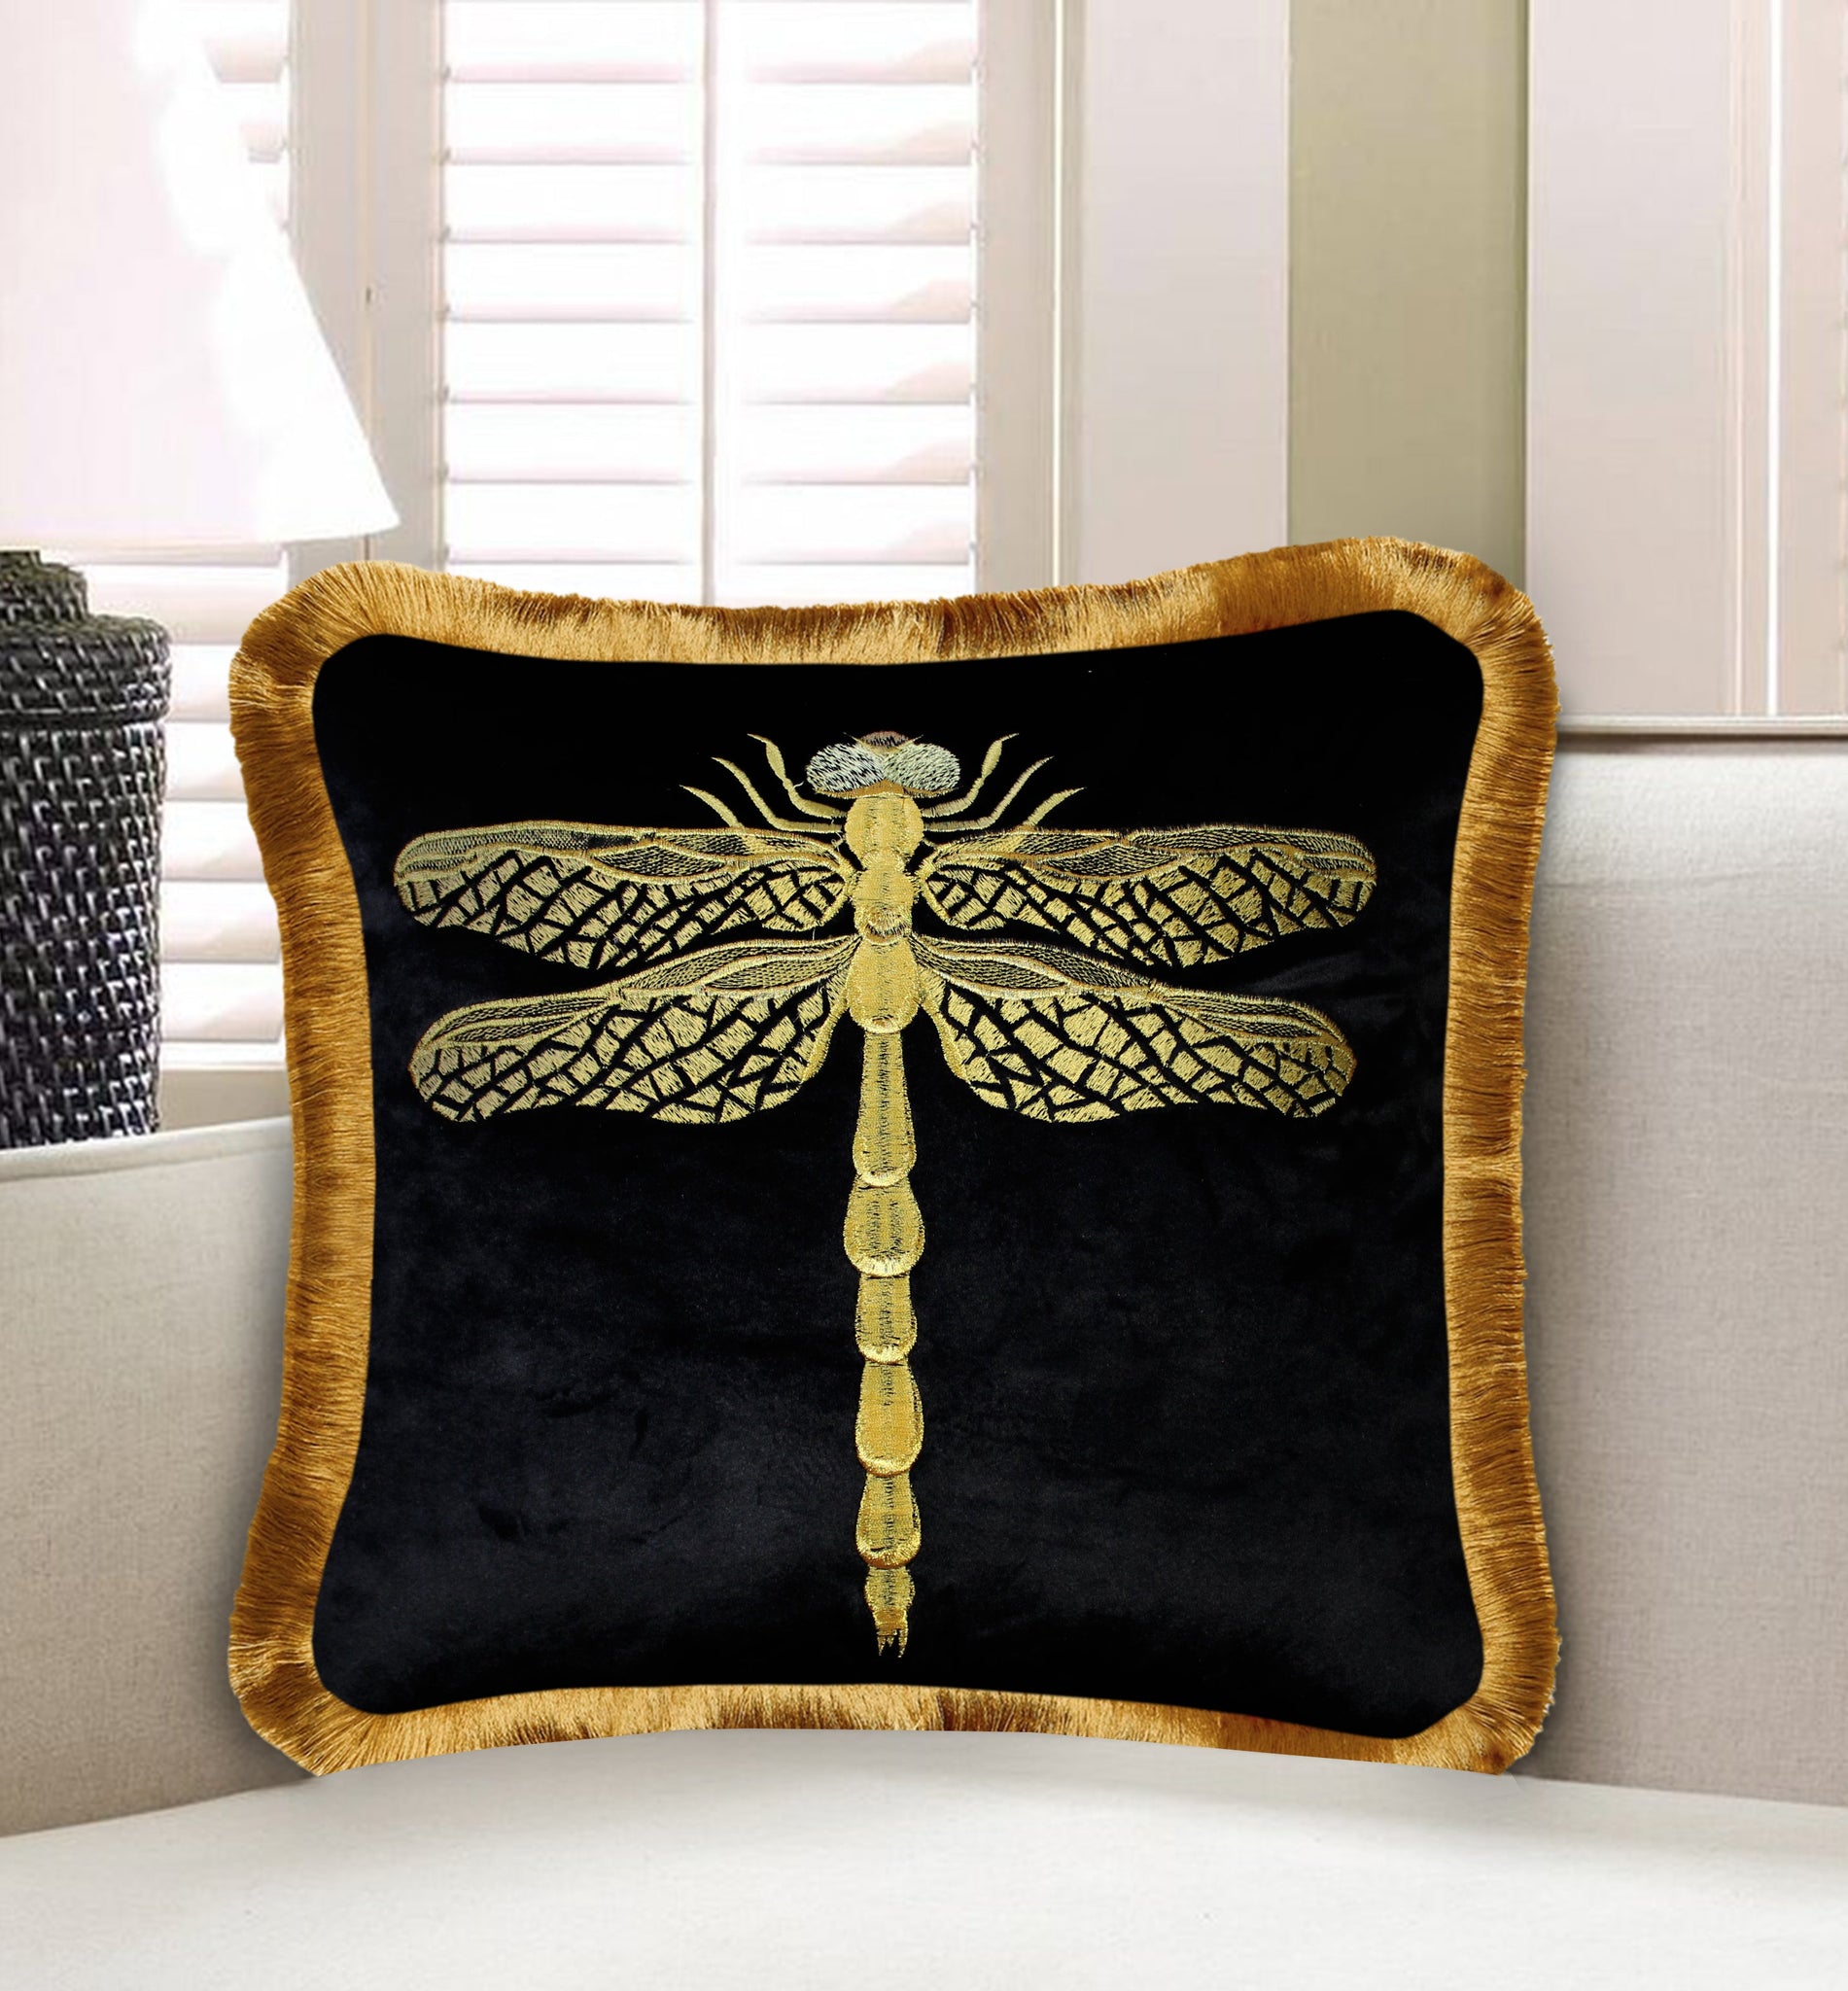 Velvet Dragonfly Embroidery Cushion Cover Home Decor Insect Decorative Pillowcase Cute Animal Throw Pillow with Golden Fringe for Bedroom Living Room Black Size 45x45 cm (18x18 Inches)